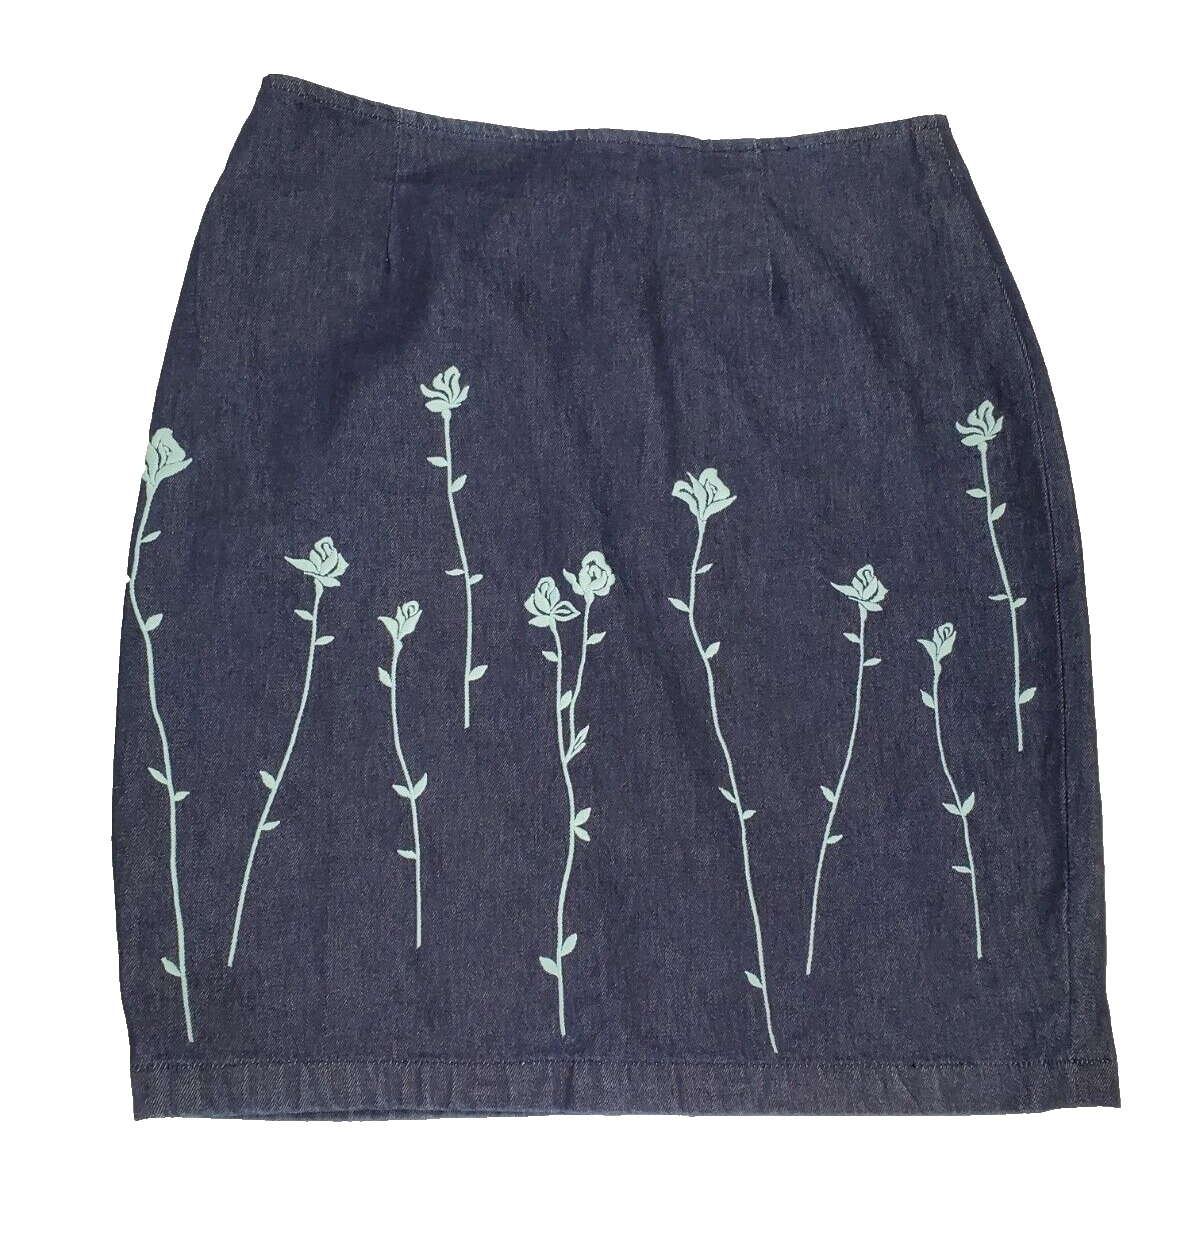 Primary image for Paradox Skirt Women's Missy Size 14 Denim Vintage Y2K Embroidered Blue Flowers